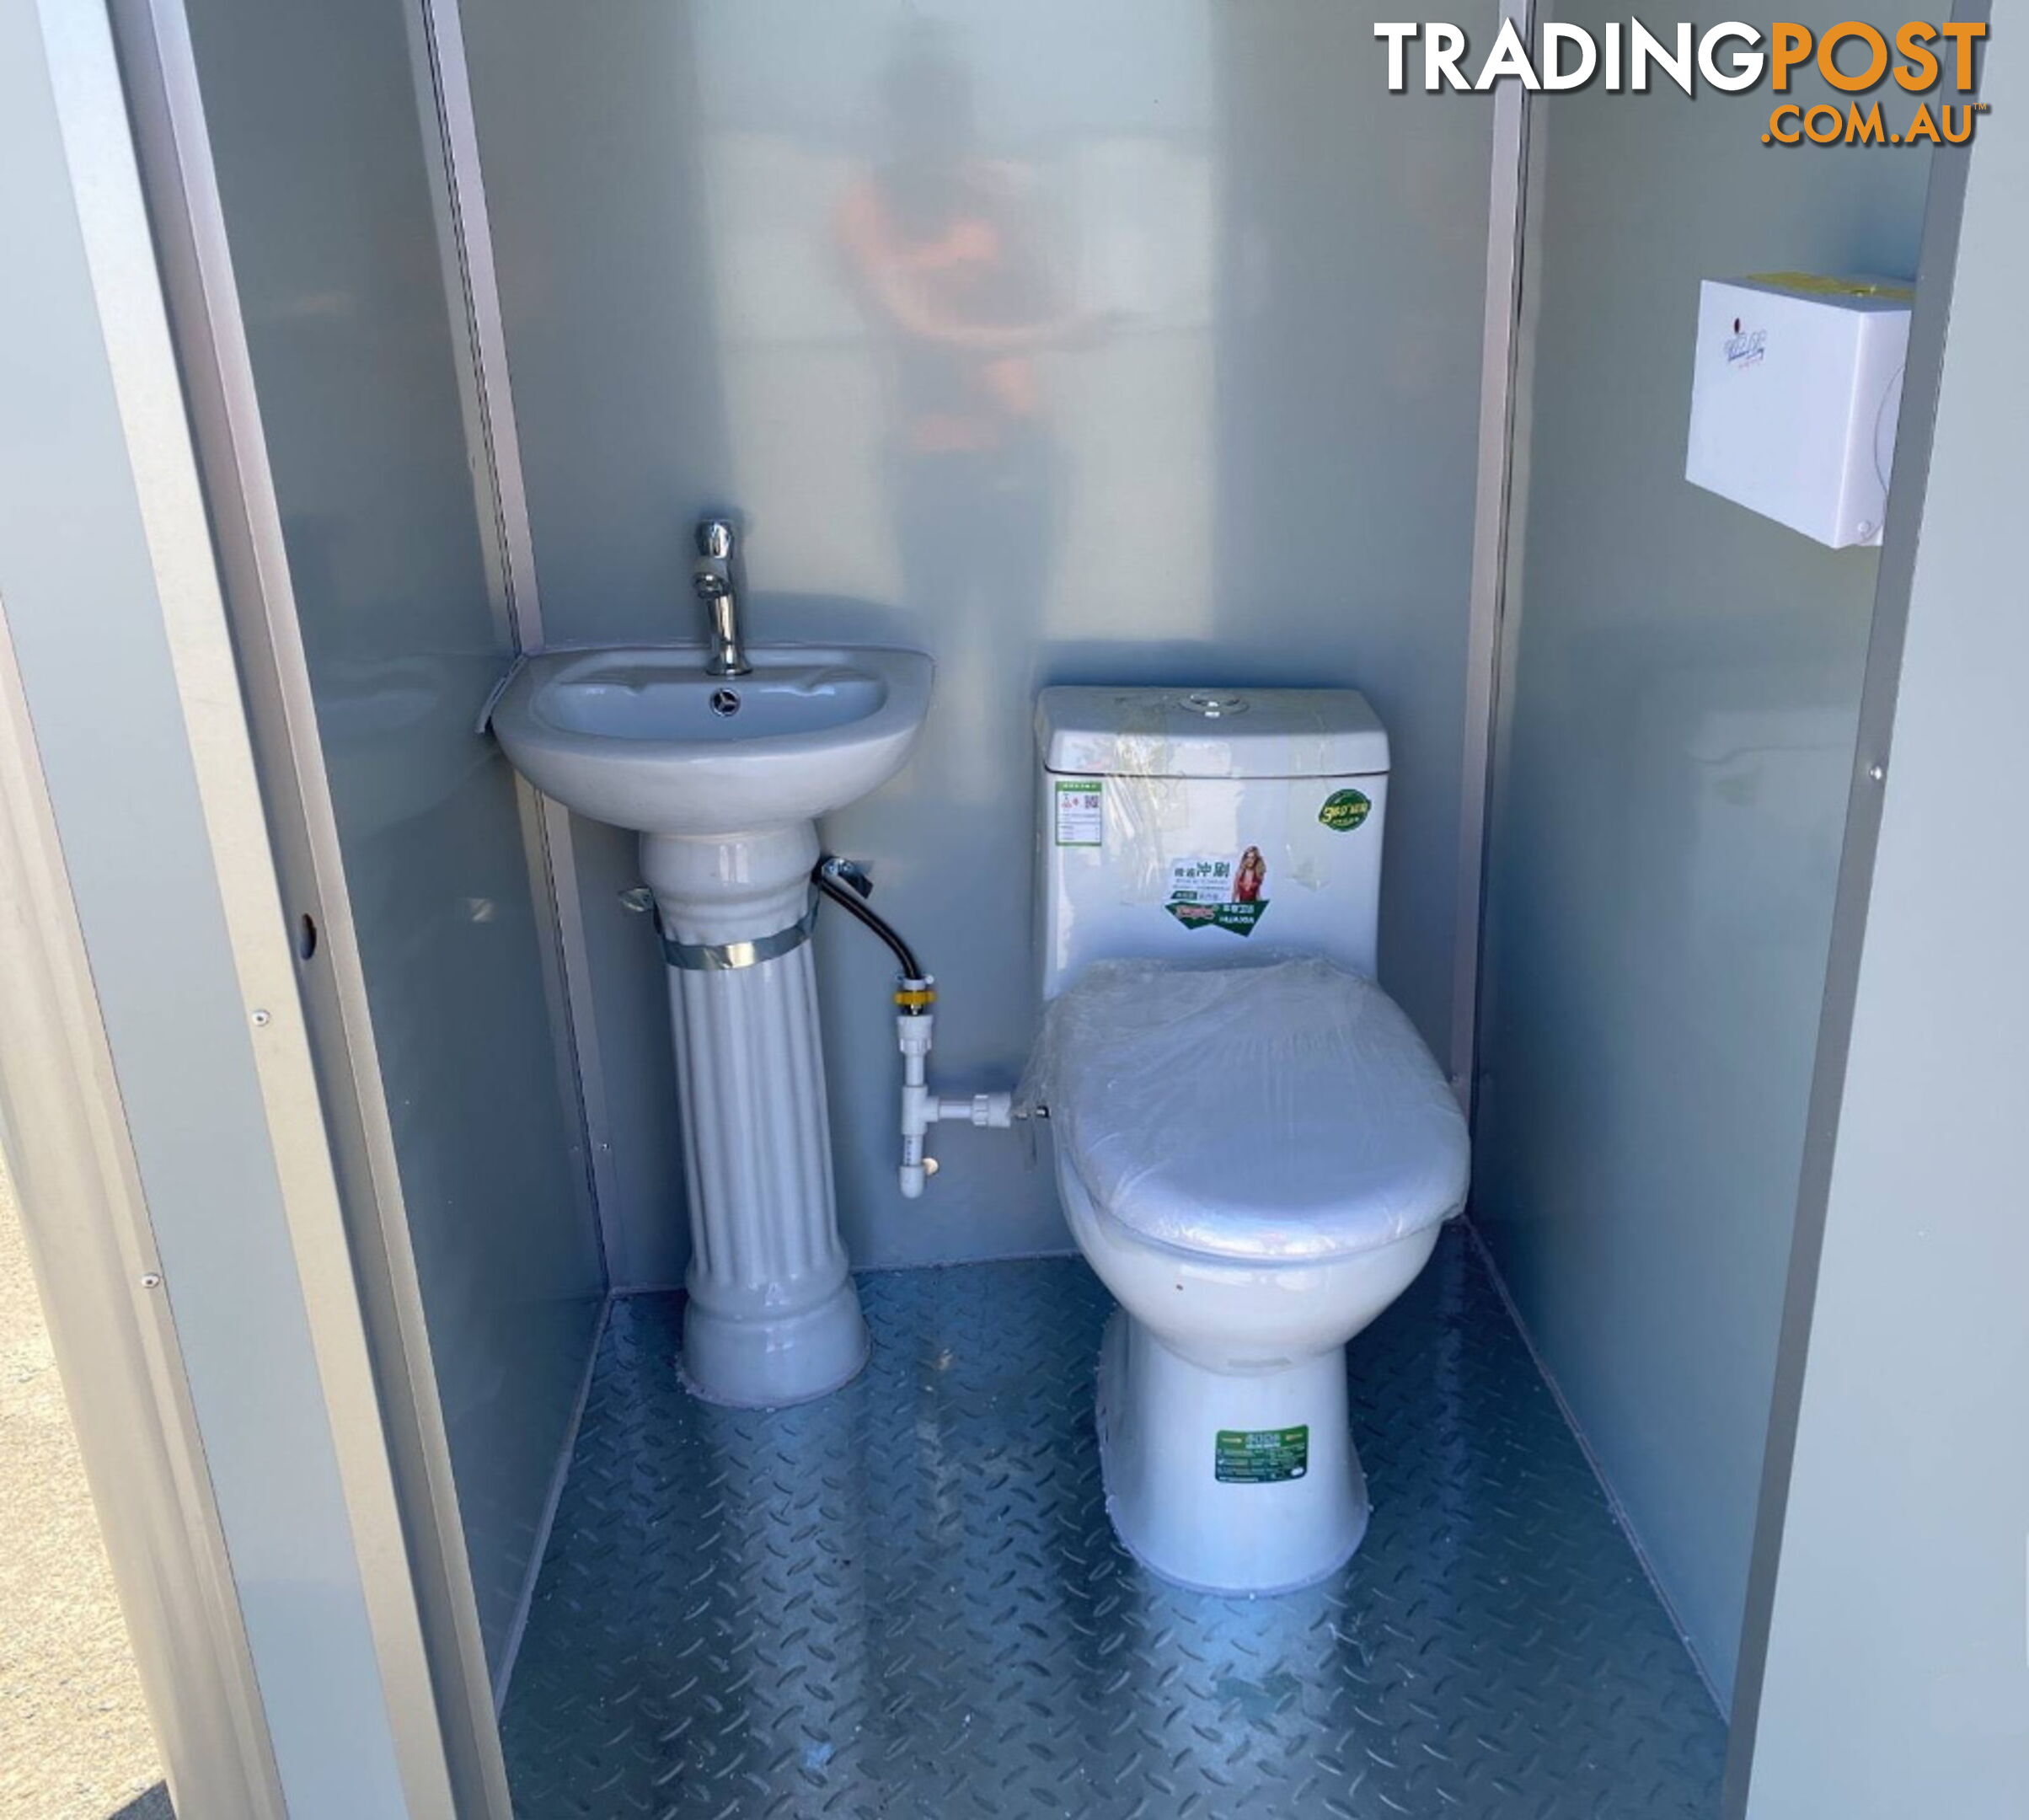 New Single Portable Toilet Restroom Block - DISCOUNTED Light Damage